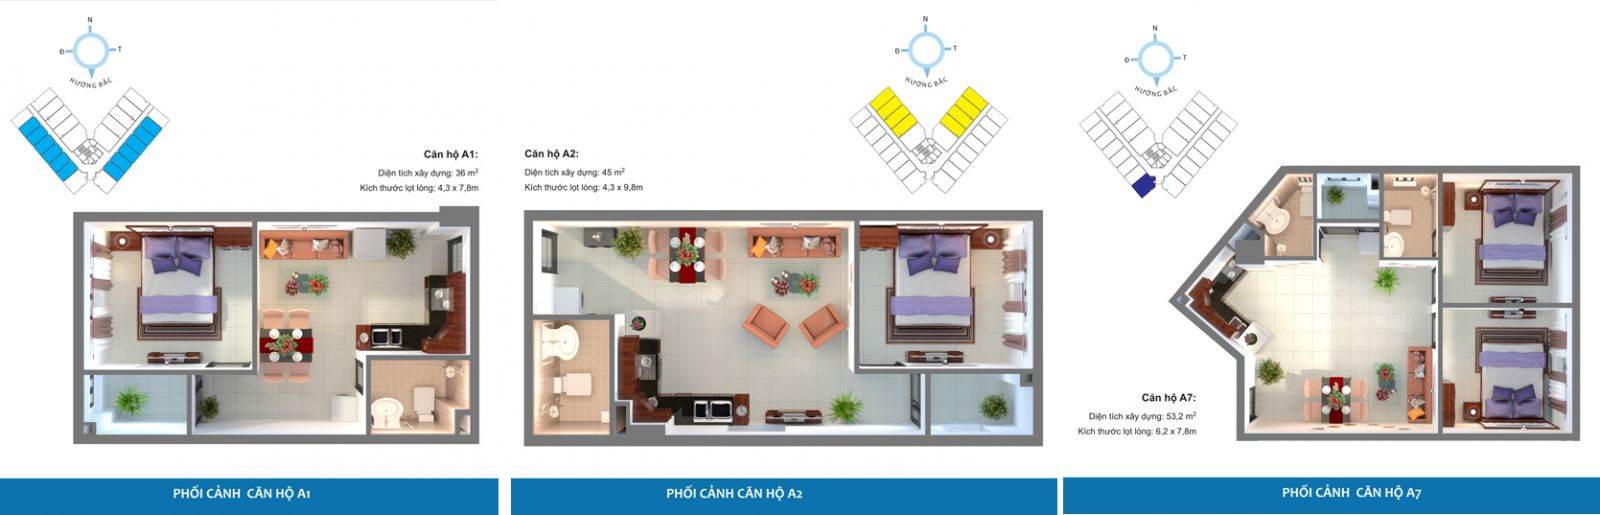 The apartment complex layout